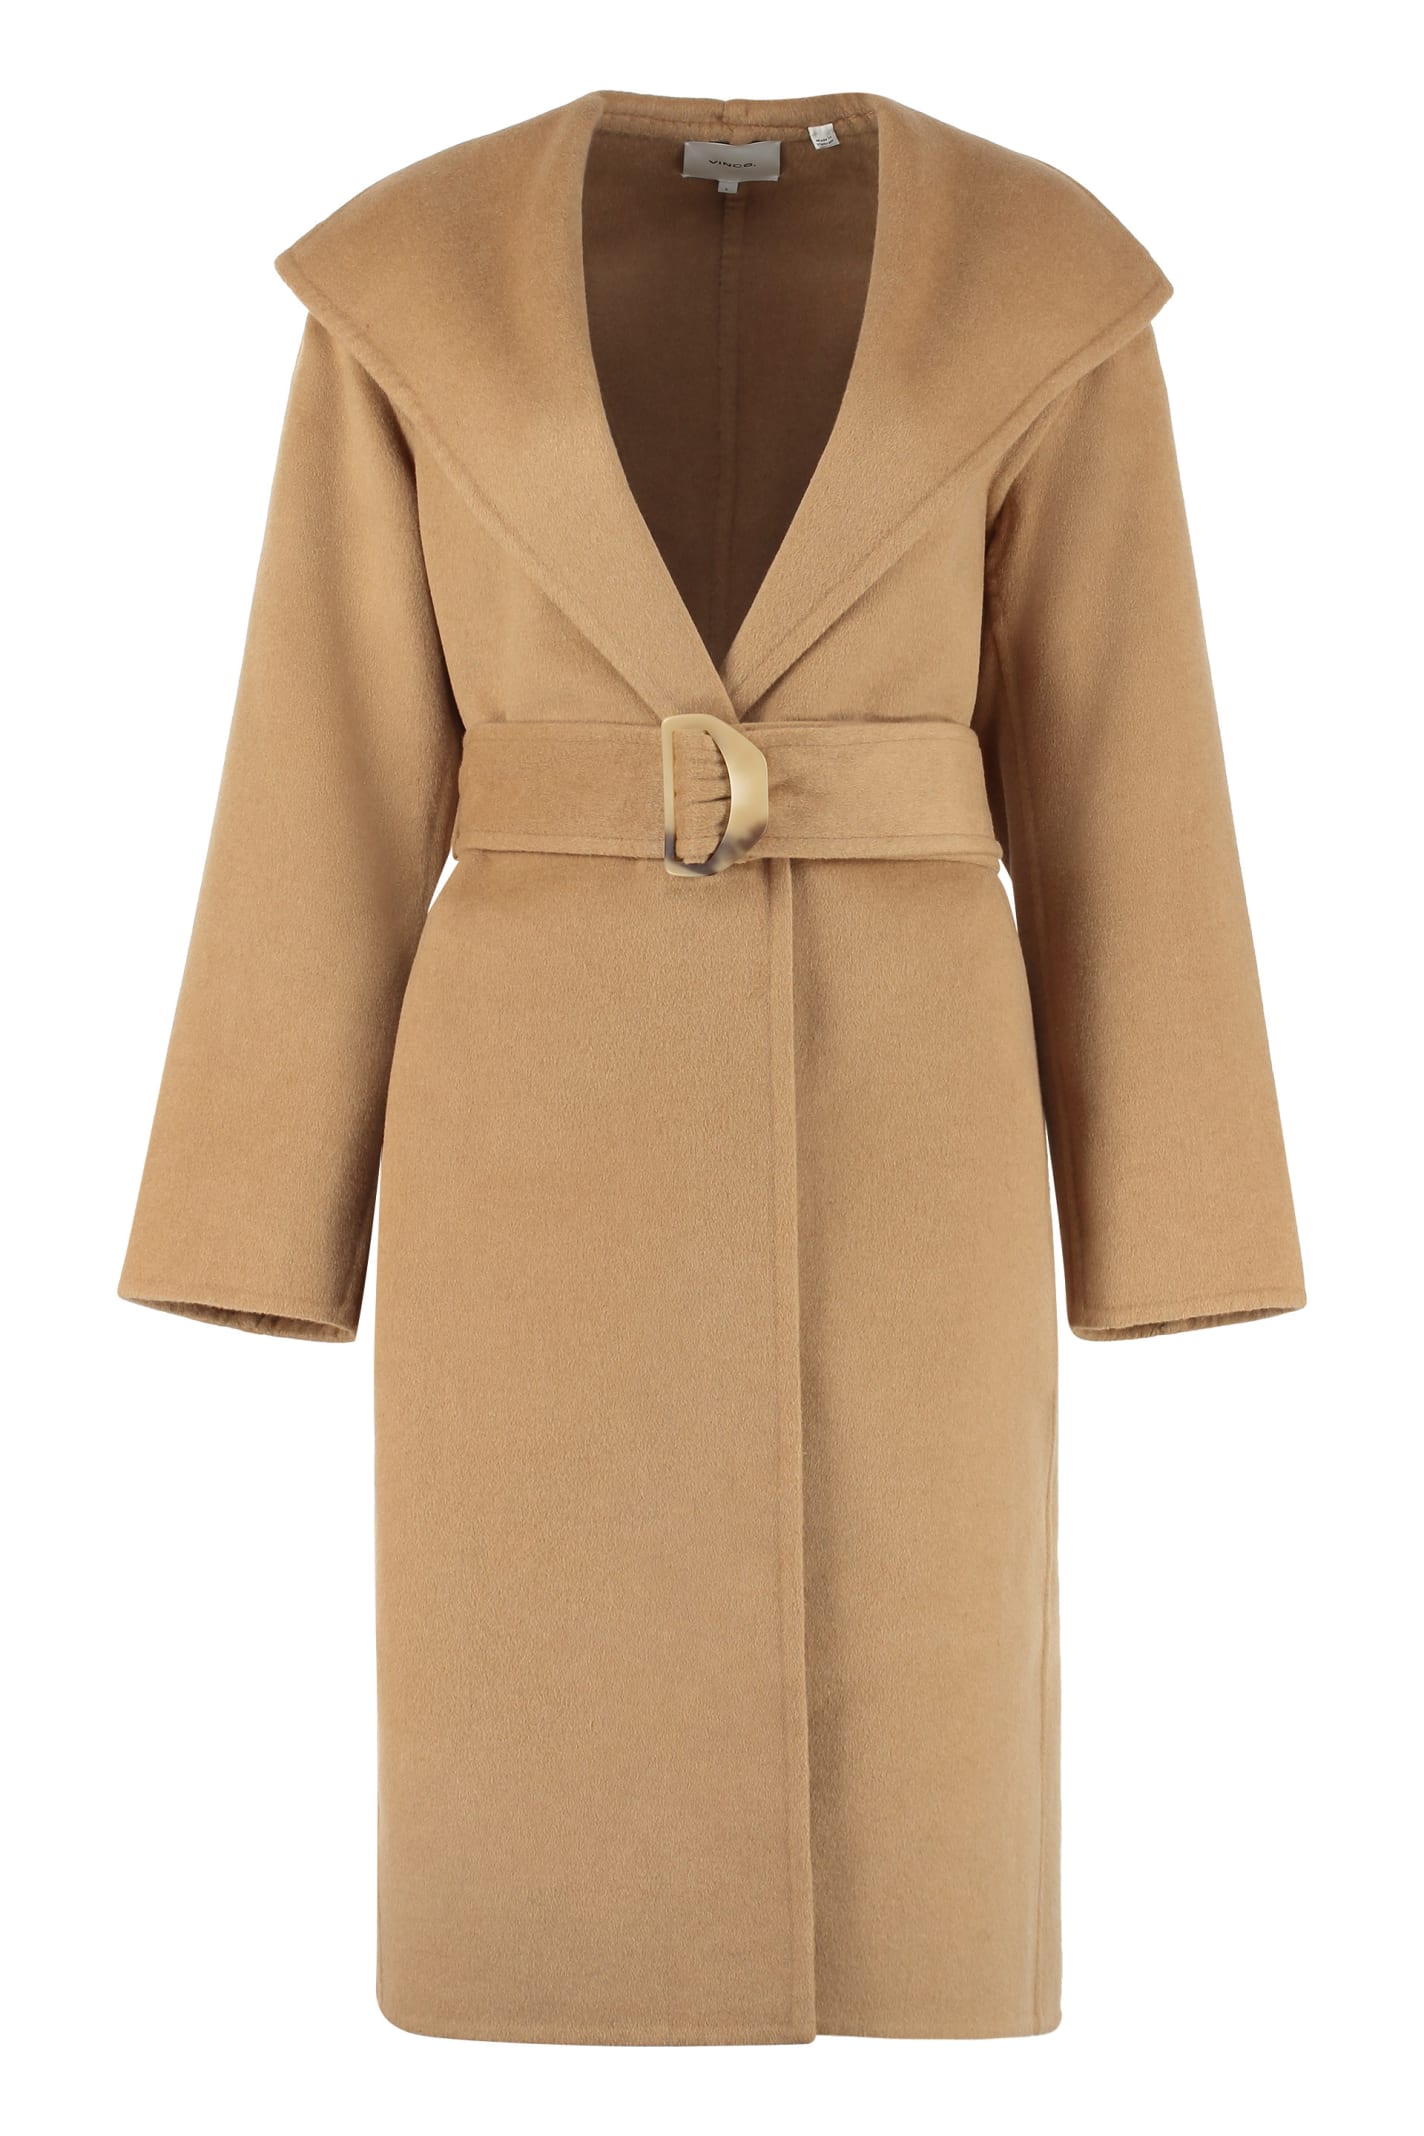 Vince Wool And Cashmere Coat